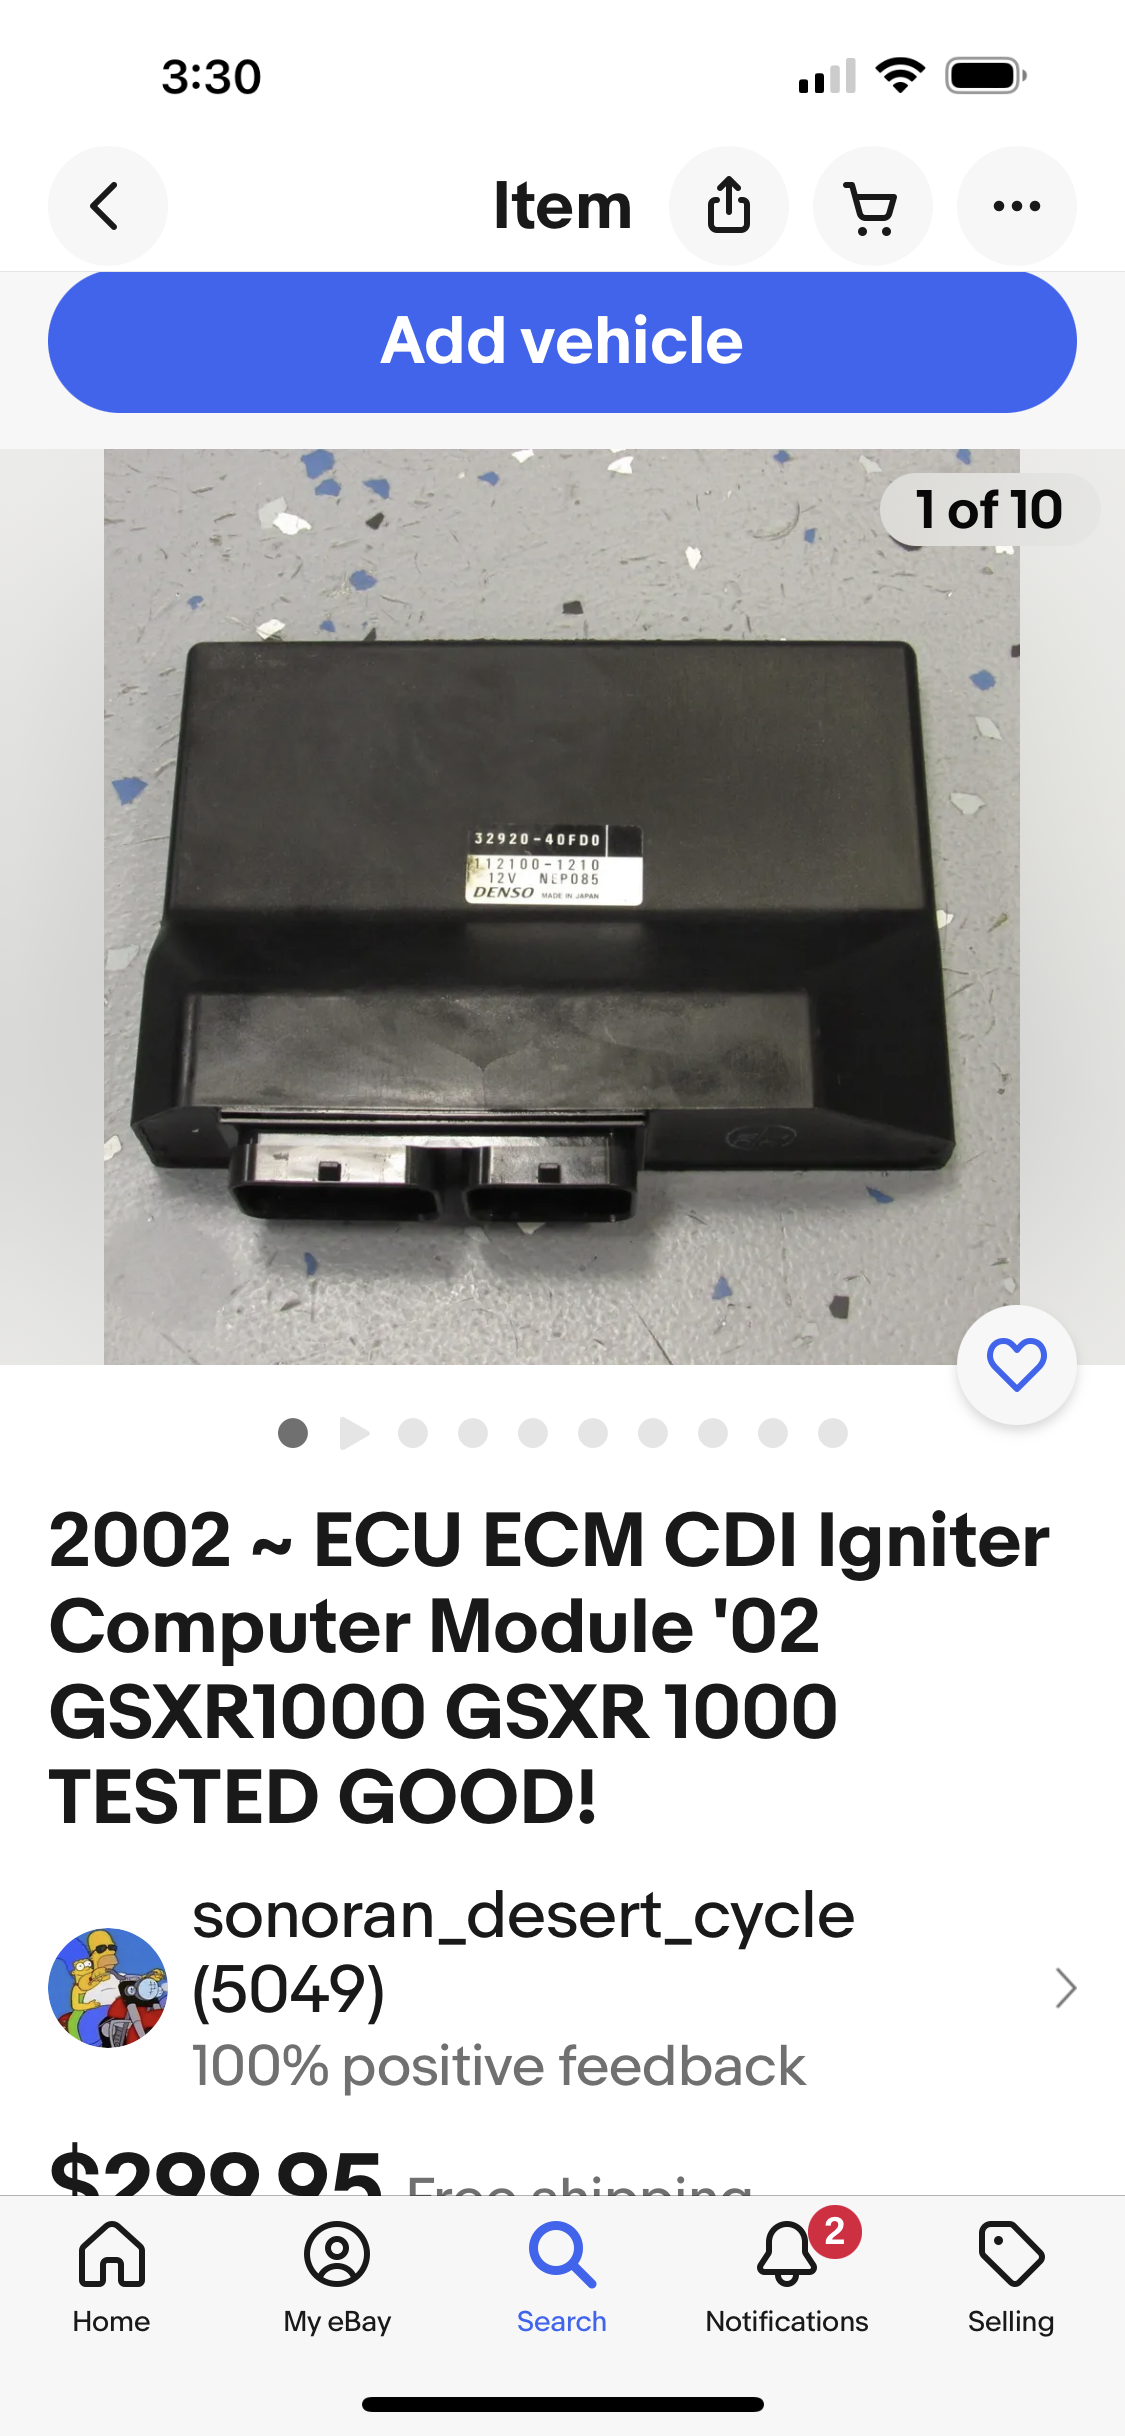 Message for accurate CDI’s prices